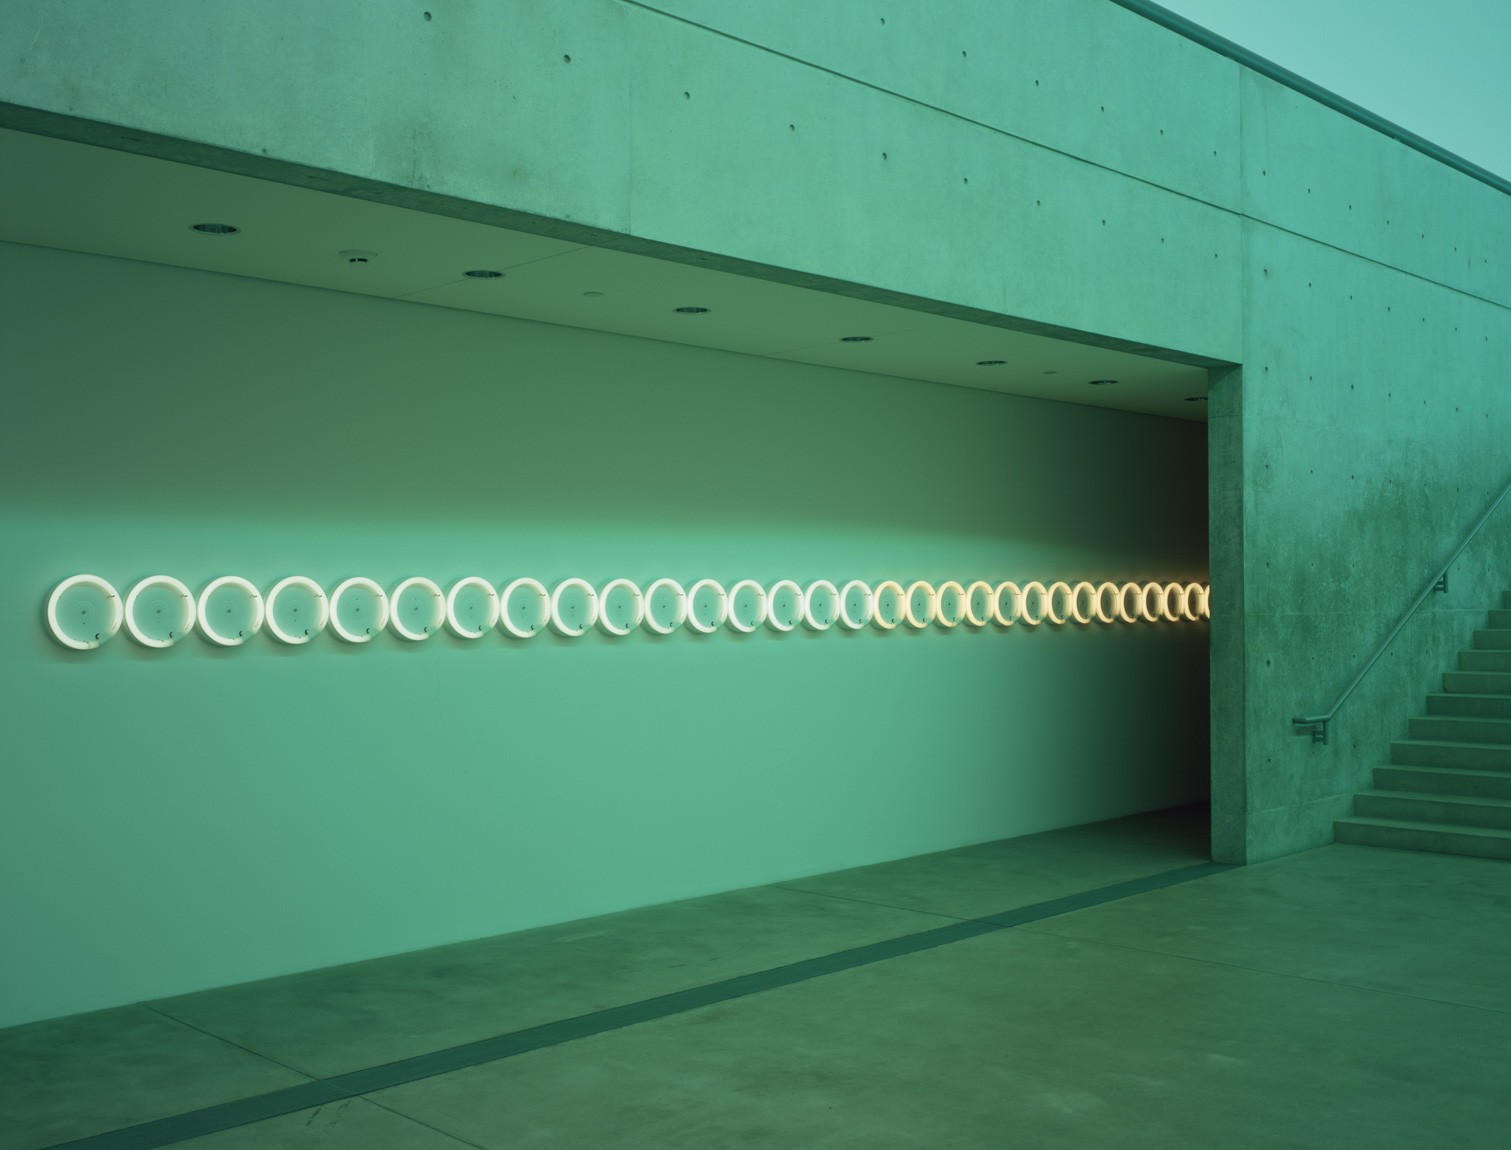 Flavin's "untitled (in memory of Barbara Schiller)," a row of fluorescent white circles, is installed along the Lower Corridor in the glow cast by Flavin's "untitled (to my dear bitch, Airily)."